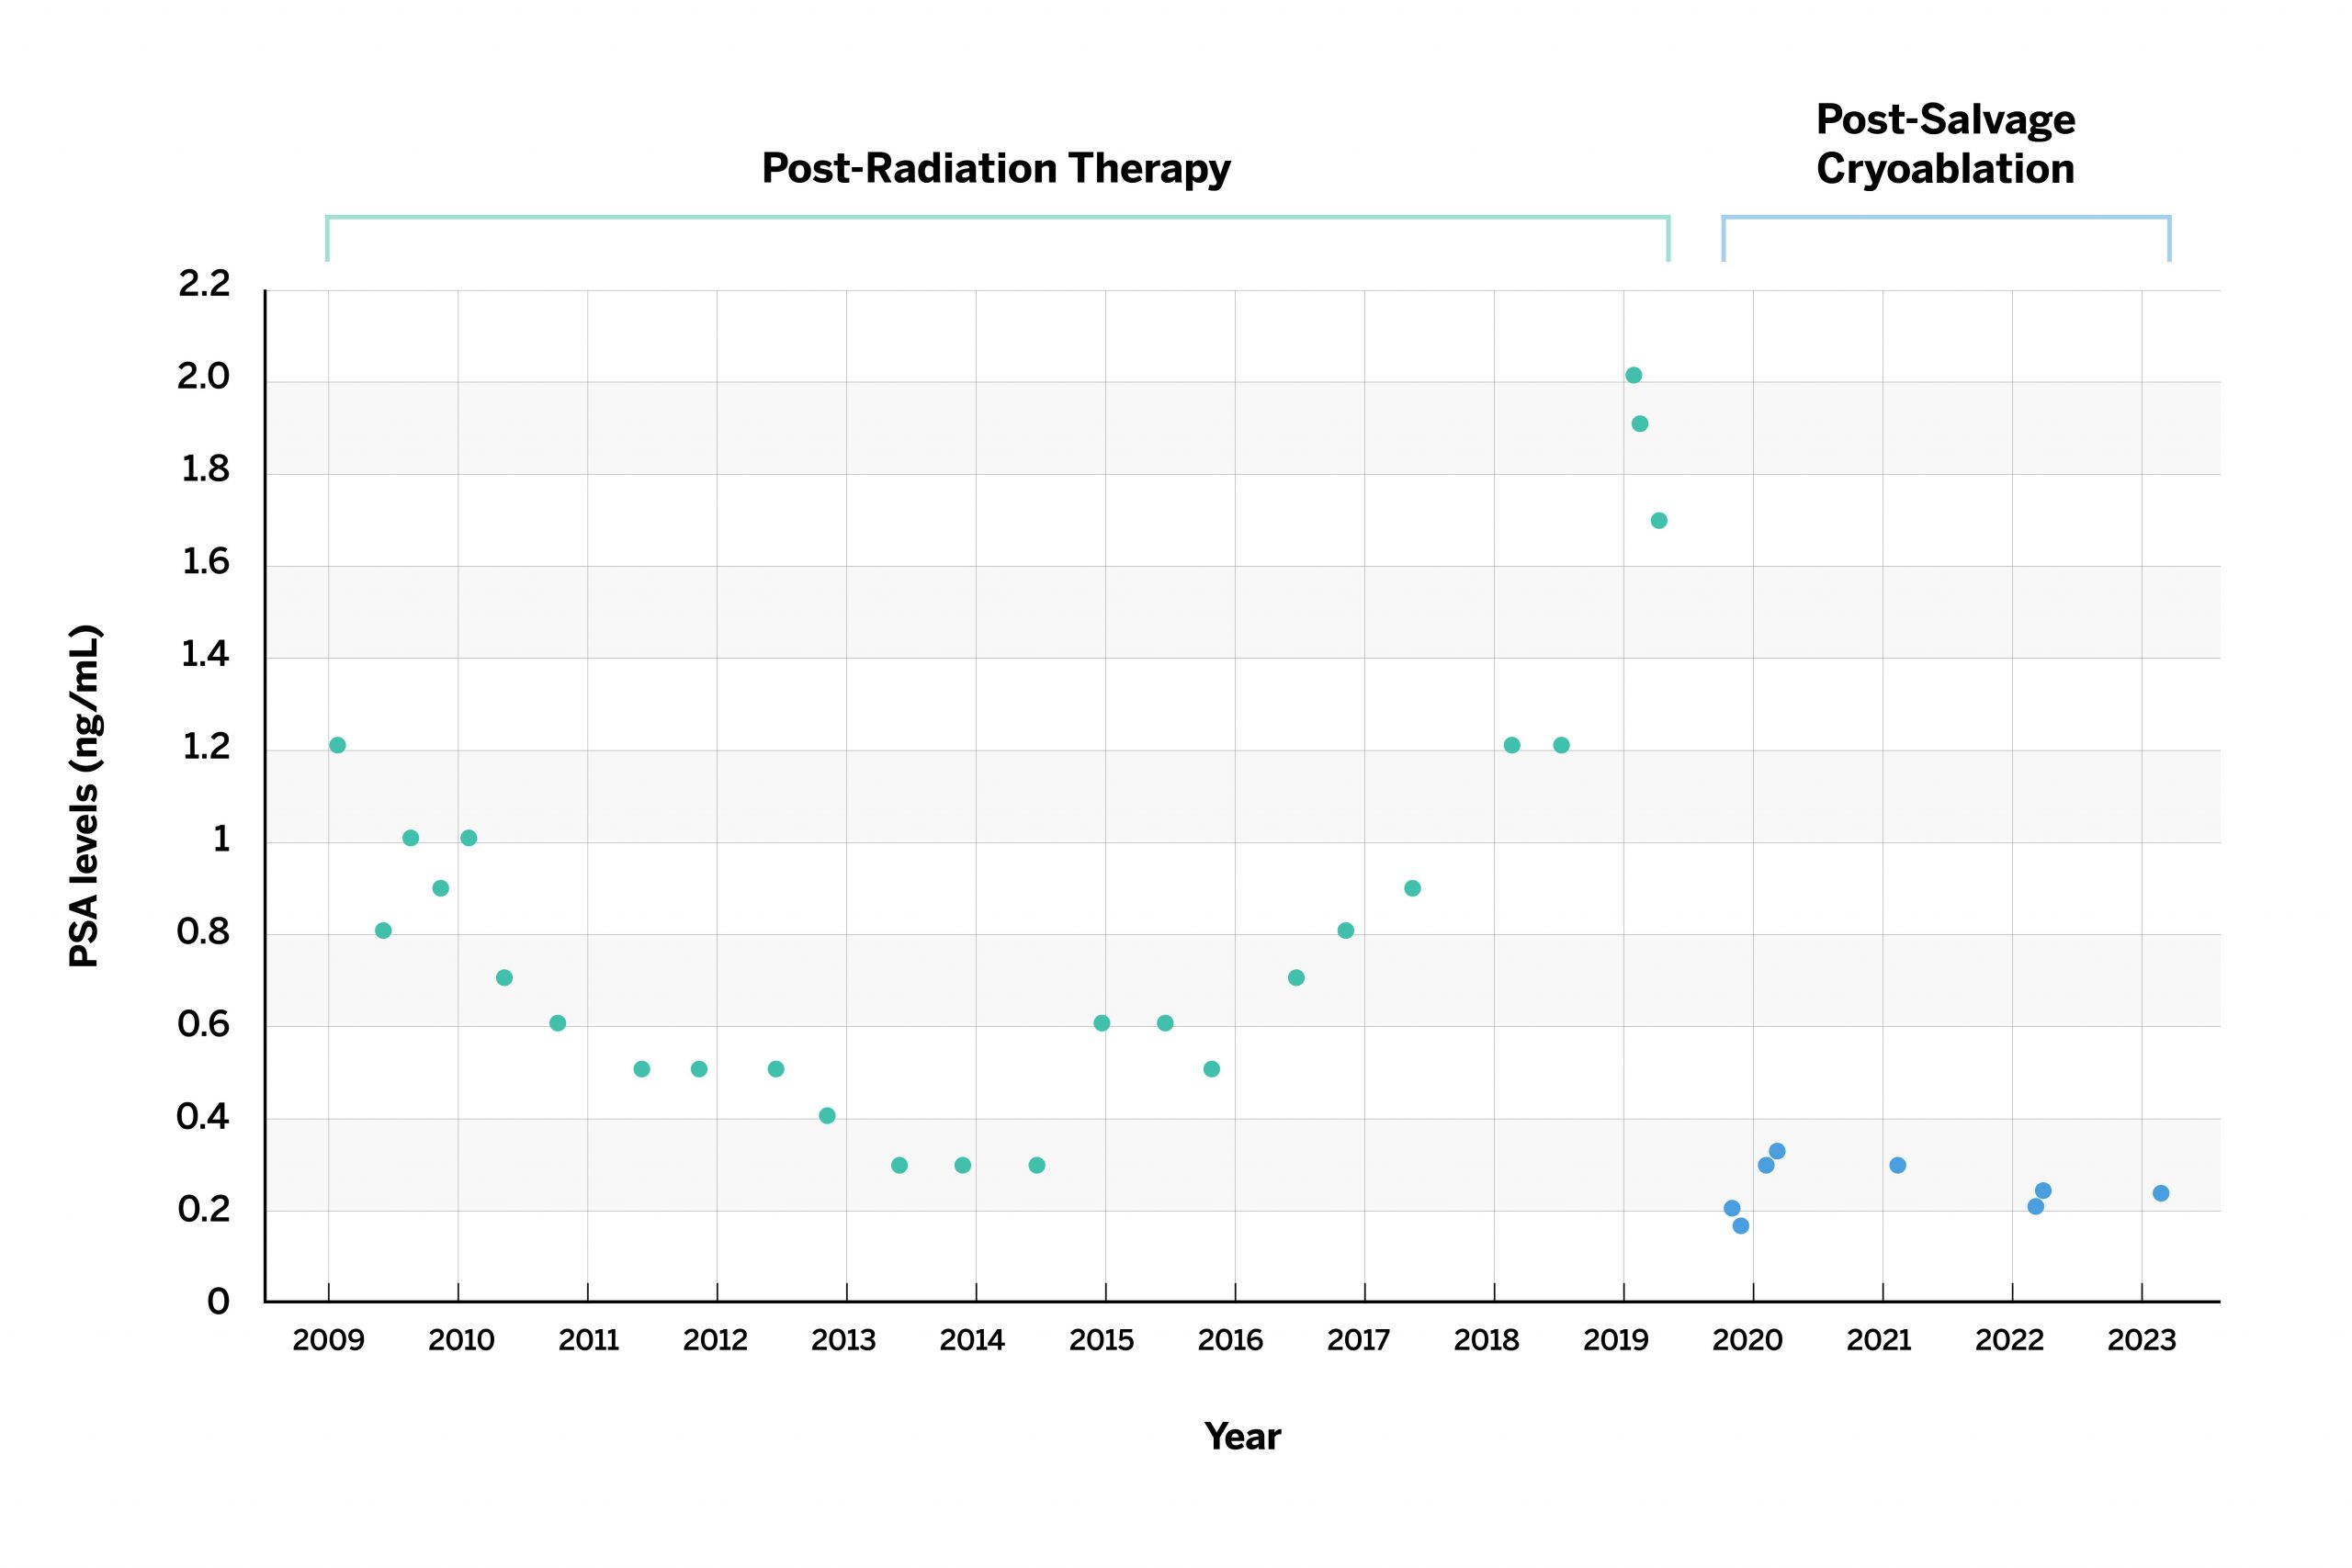 Patient’s PSA Levels Post-Radiation Therapy and PSA Levels Post-Salvage Cryoablation